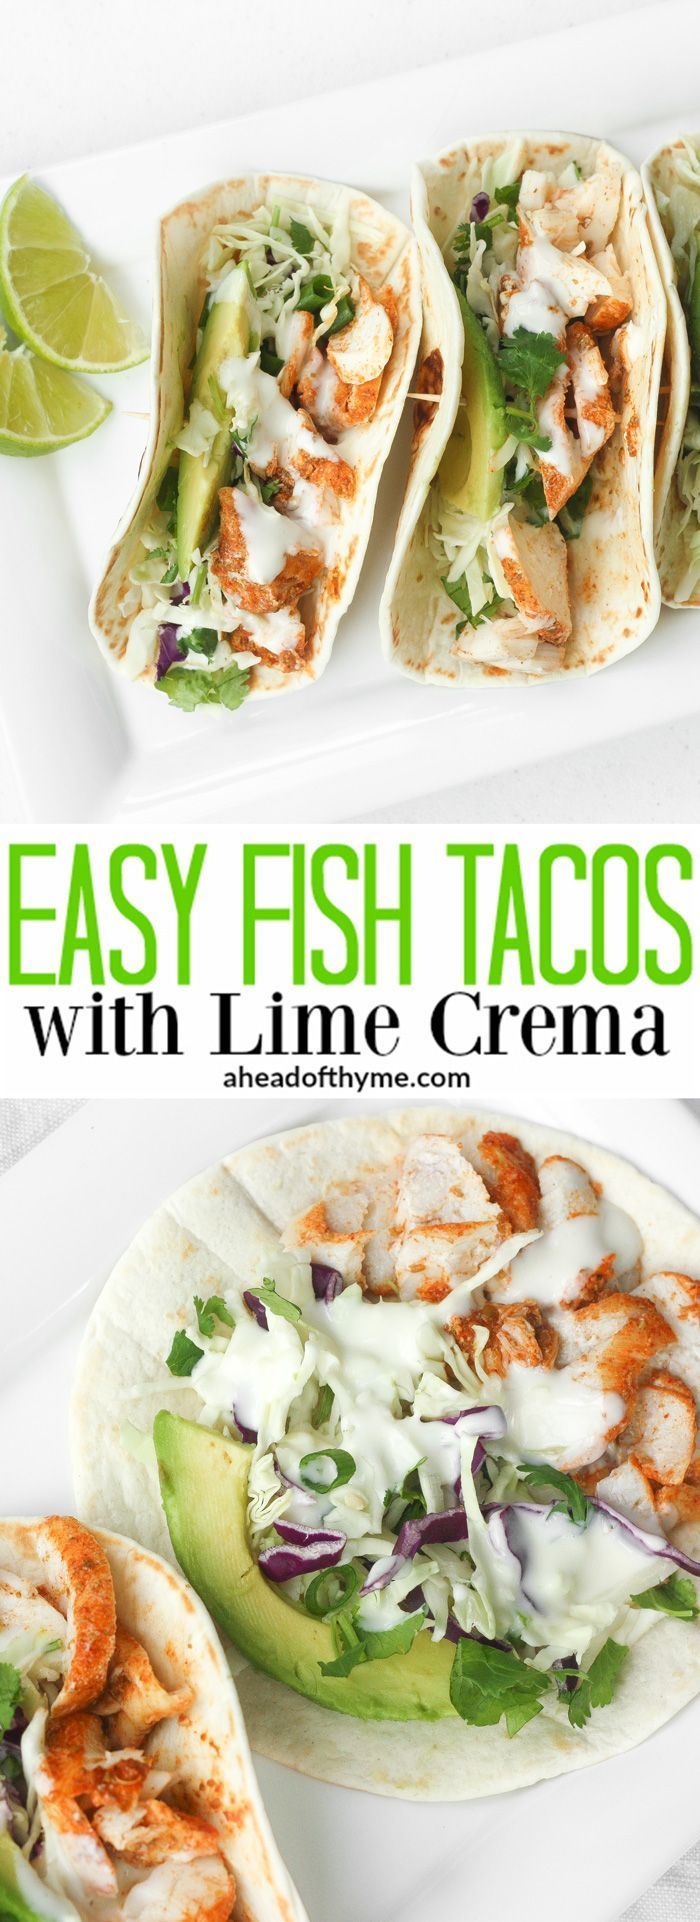 Easy Fish Tacos with Lime Crema: When lime and cilantro come together with fish…